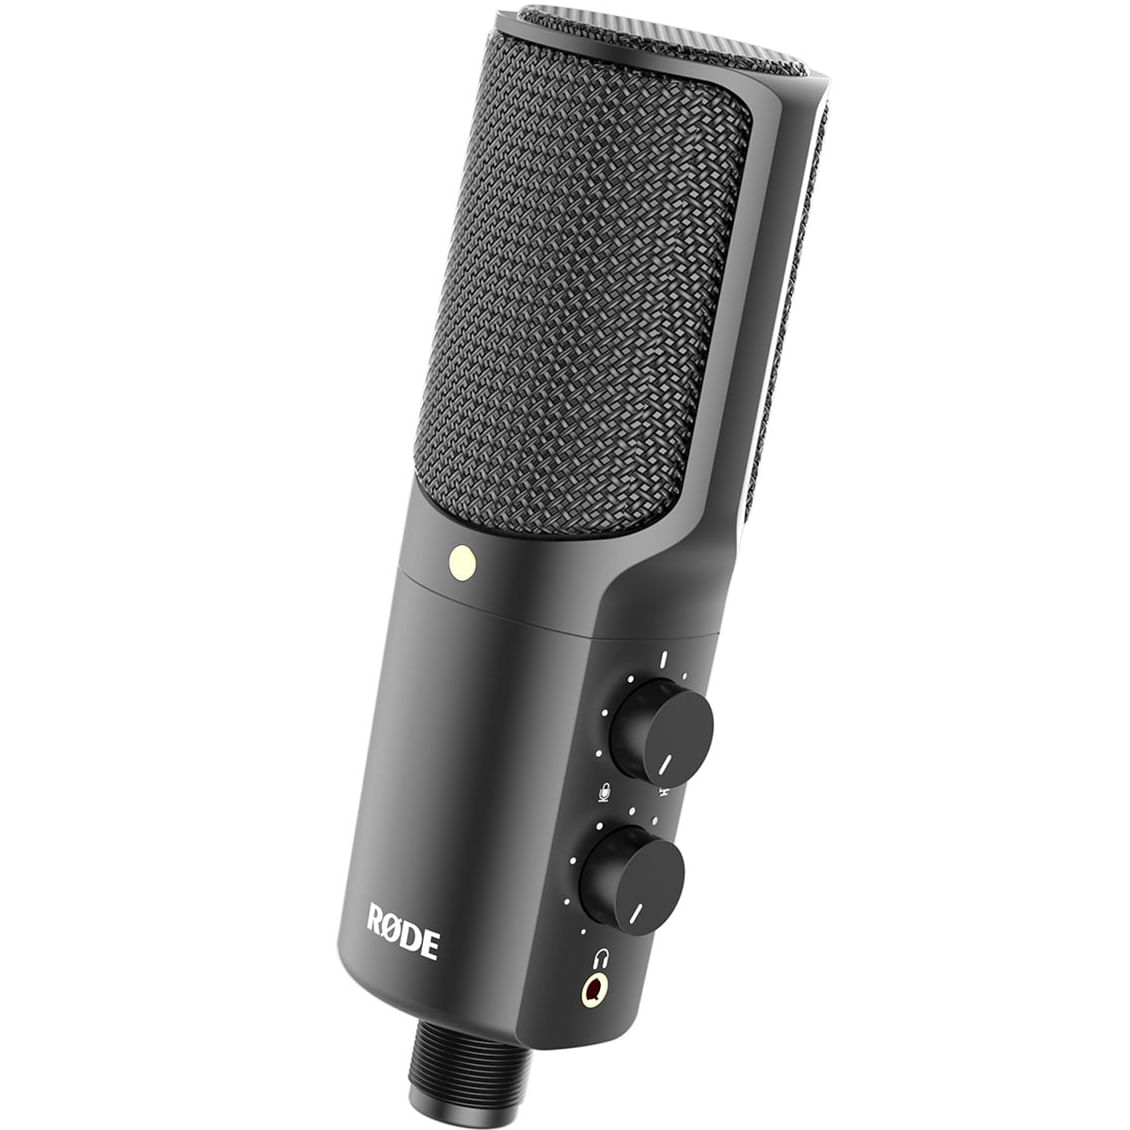 View larger image of Rode NT-USB USB Condenser Microphone